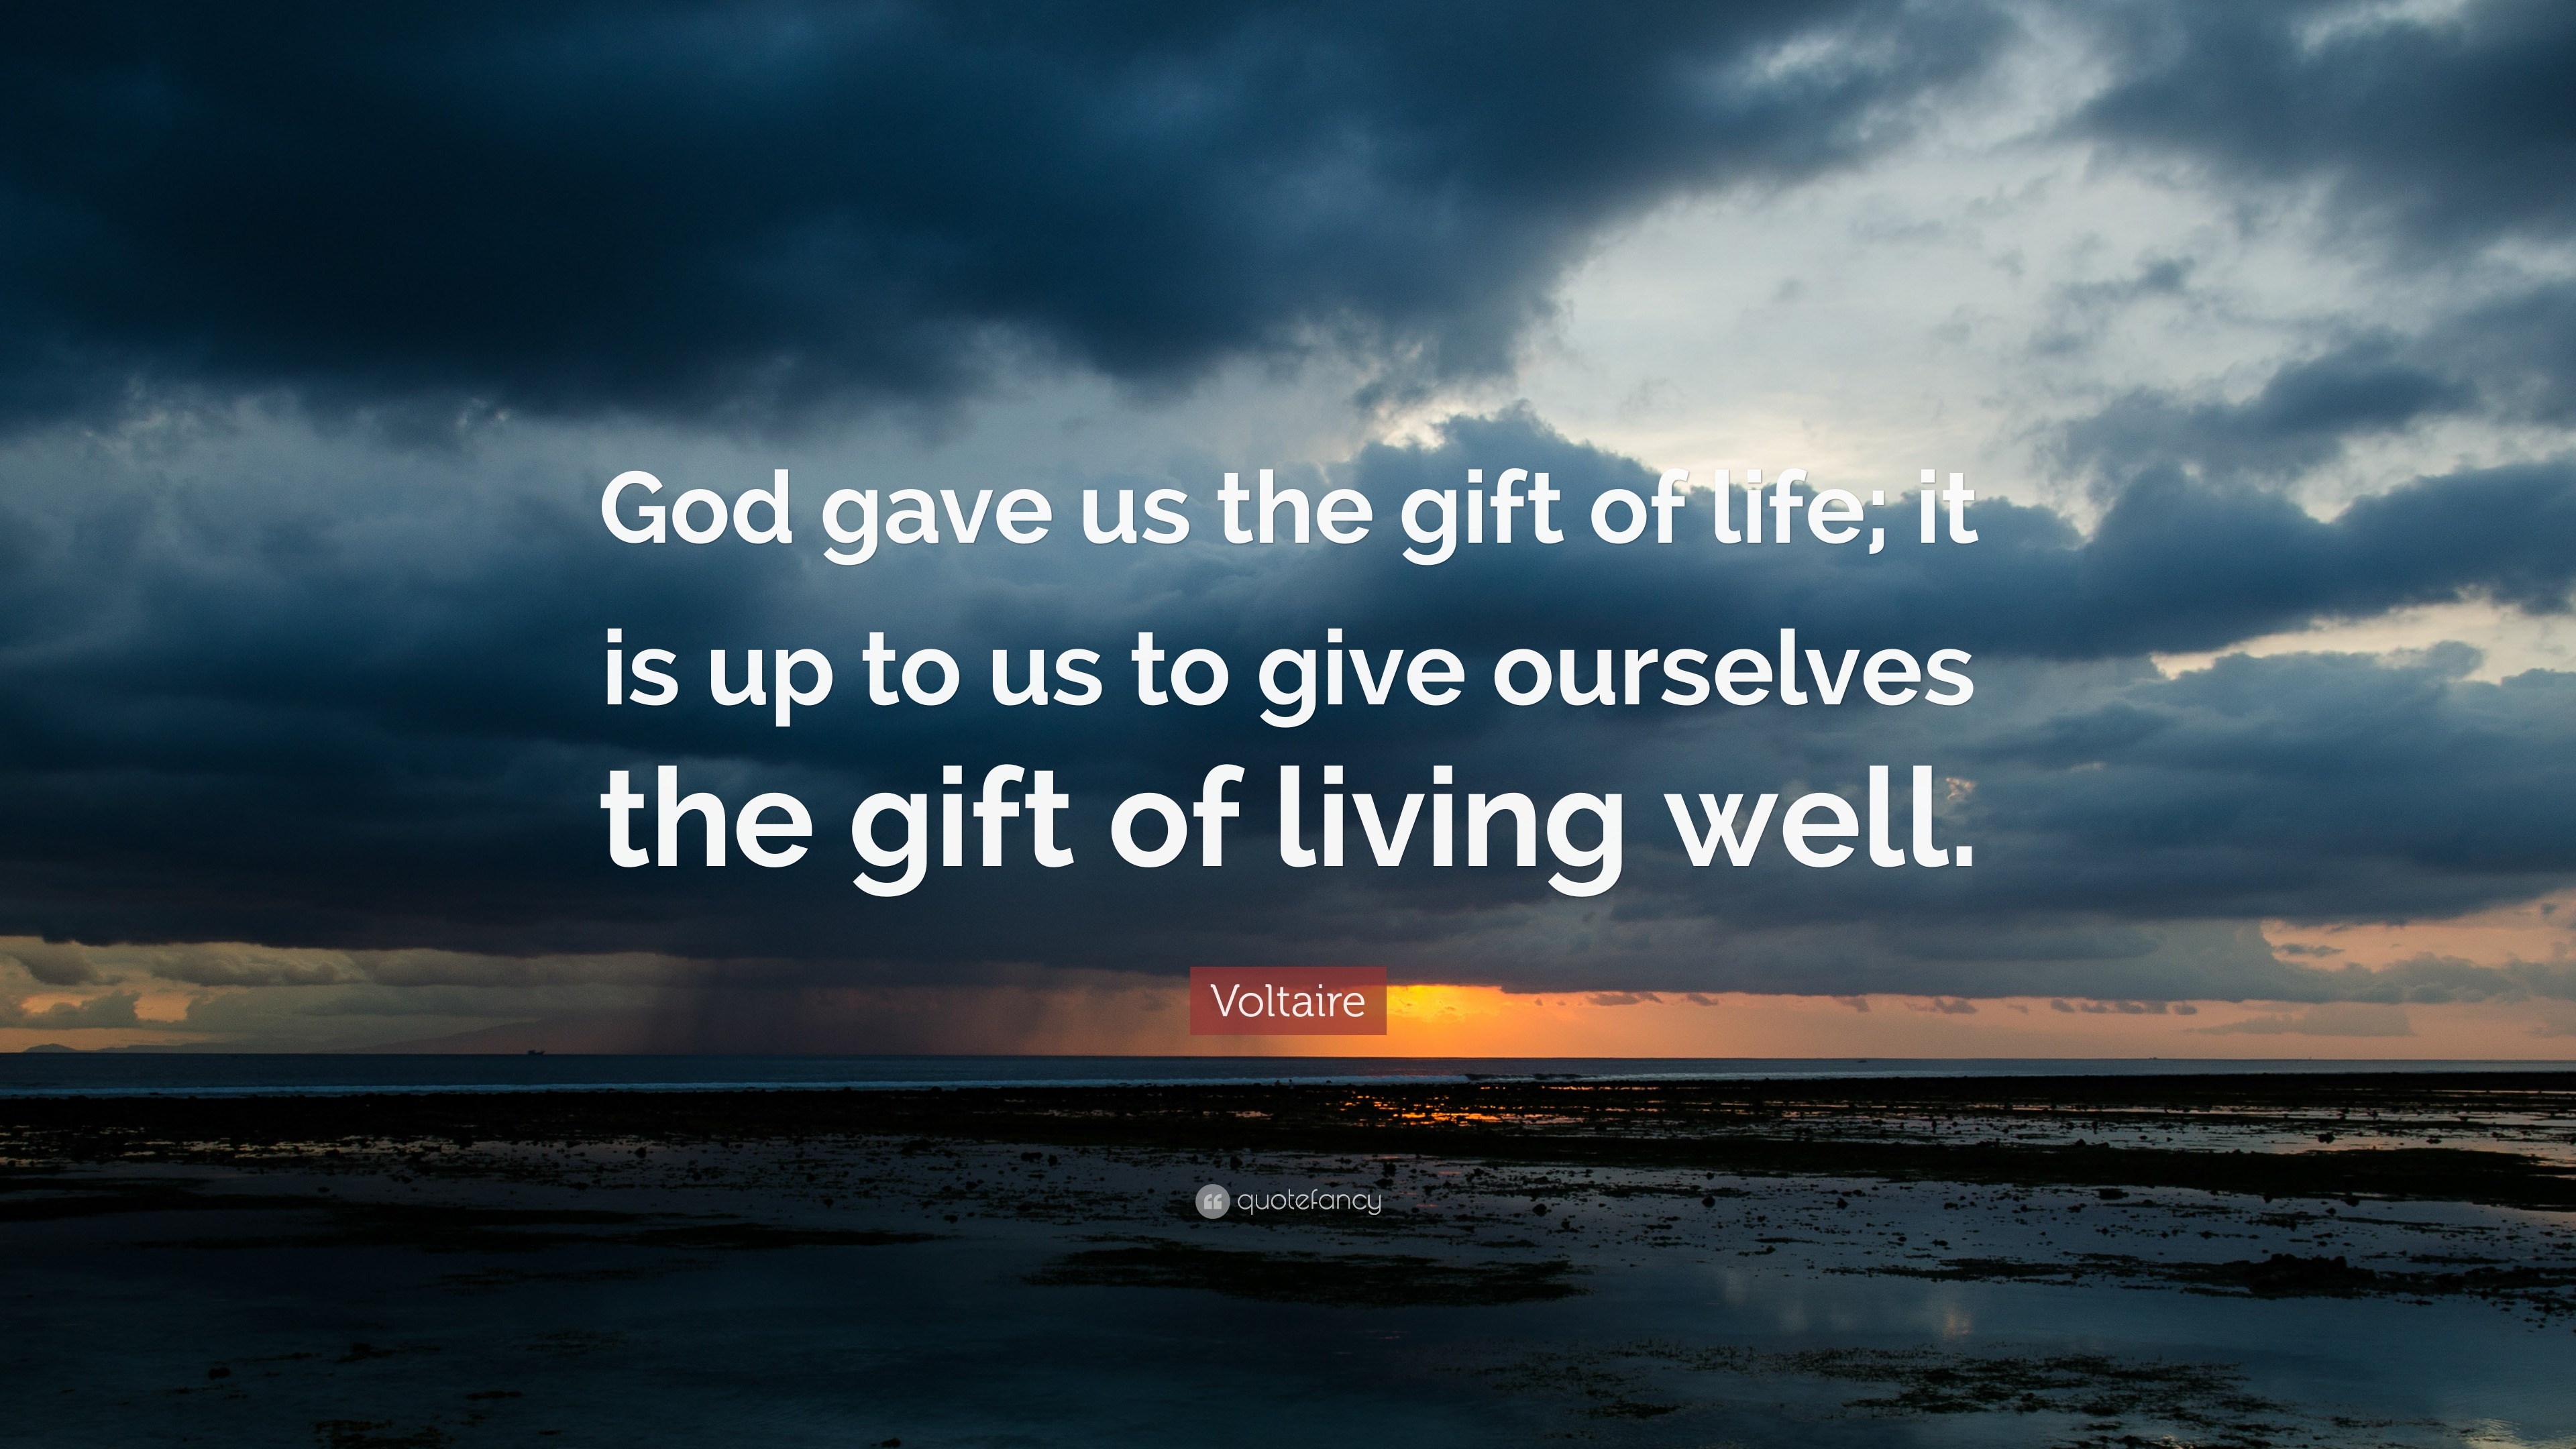 Voltaire Quote: “God gave us the gift of life; it is up to us to give